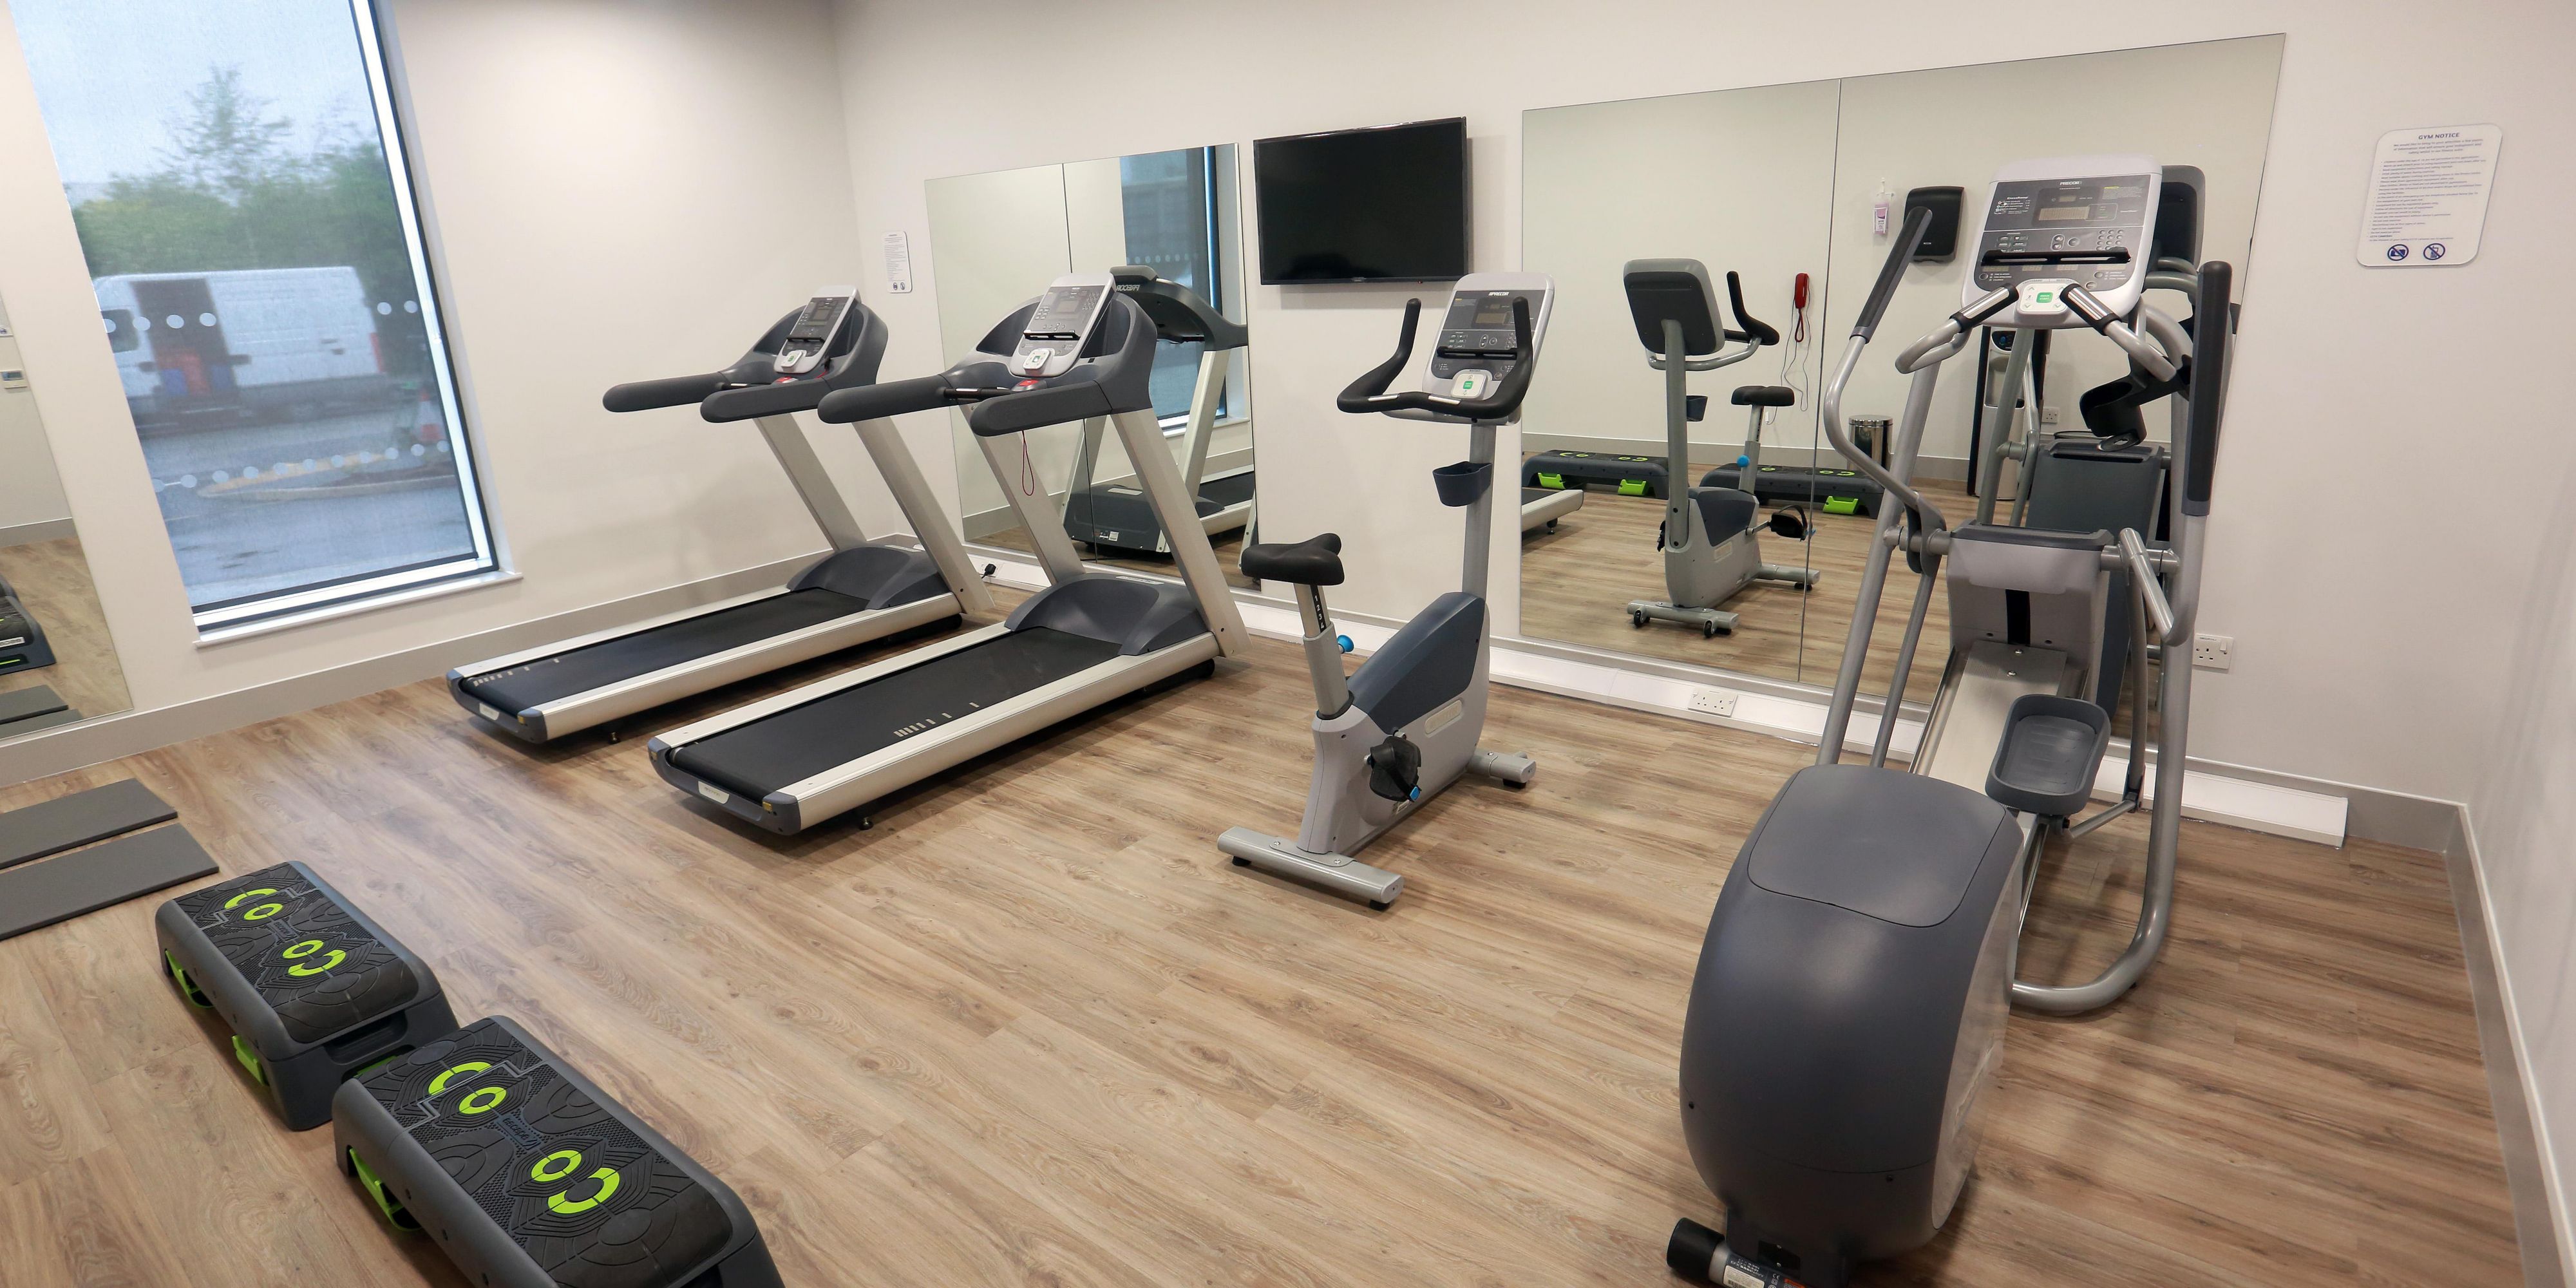 Our on-site fitness center features treadmills and cycle machines for guest use.
The fitness center is located on the ground floor and is open 24 hours. Guests just need their room keys to access the facility